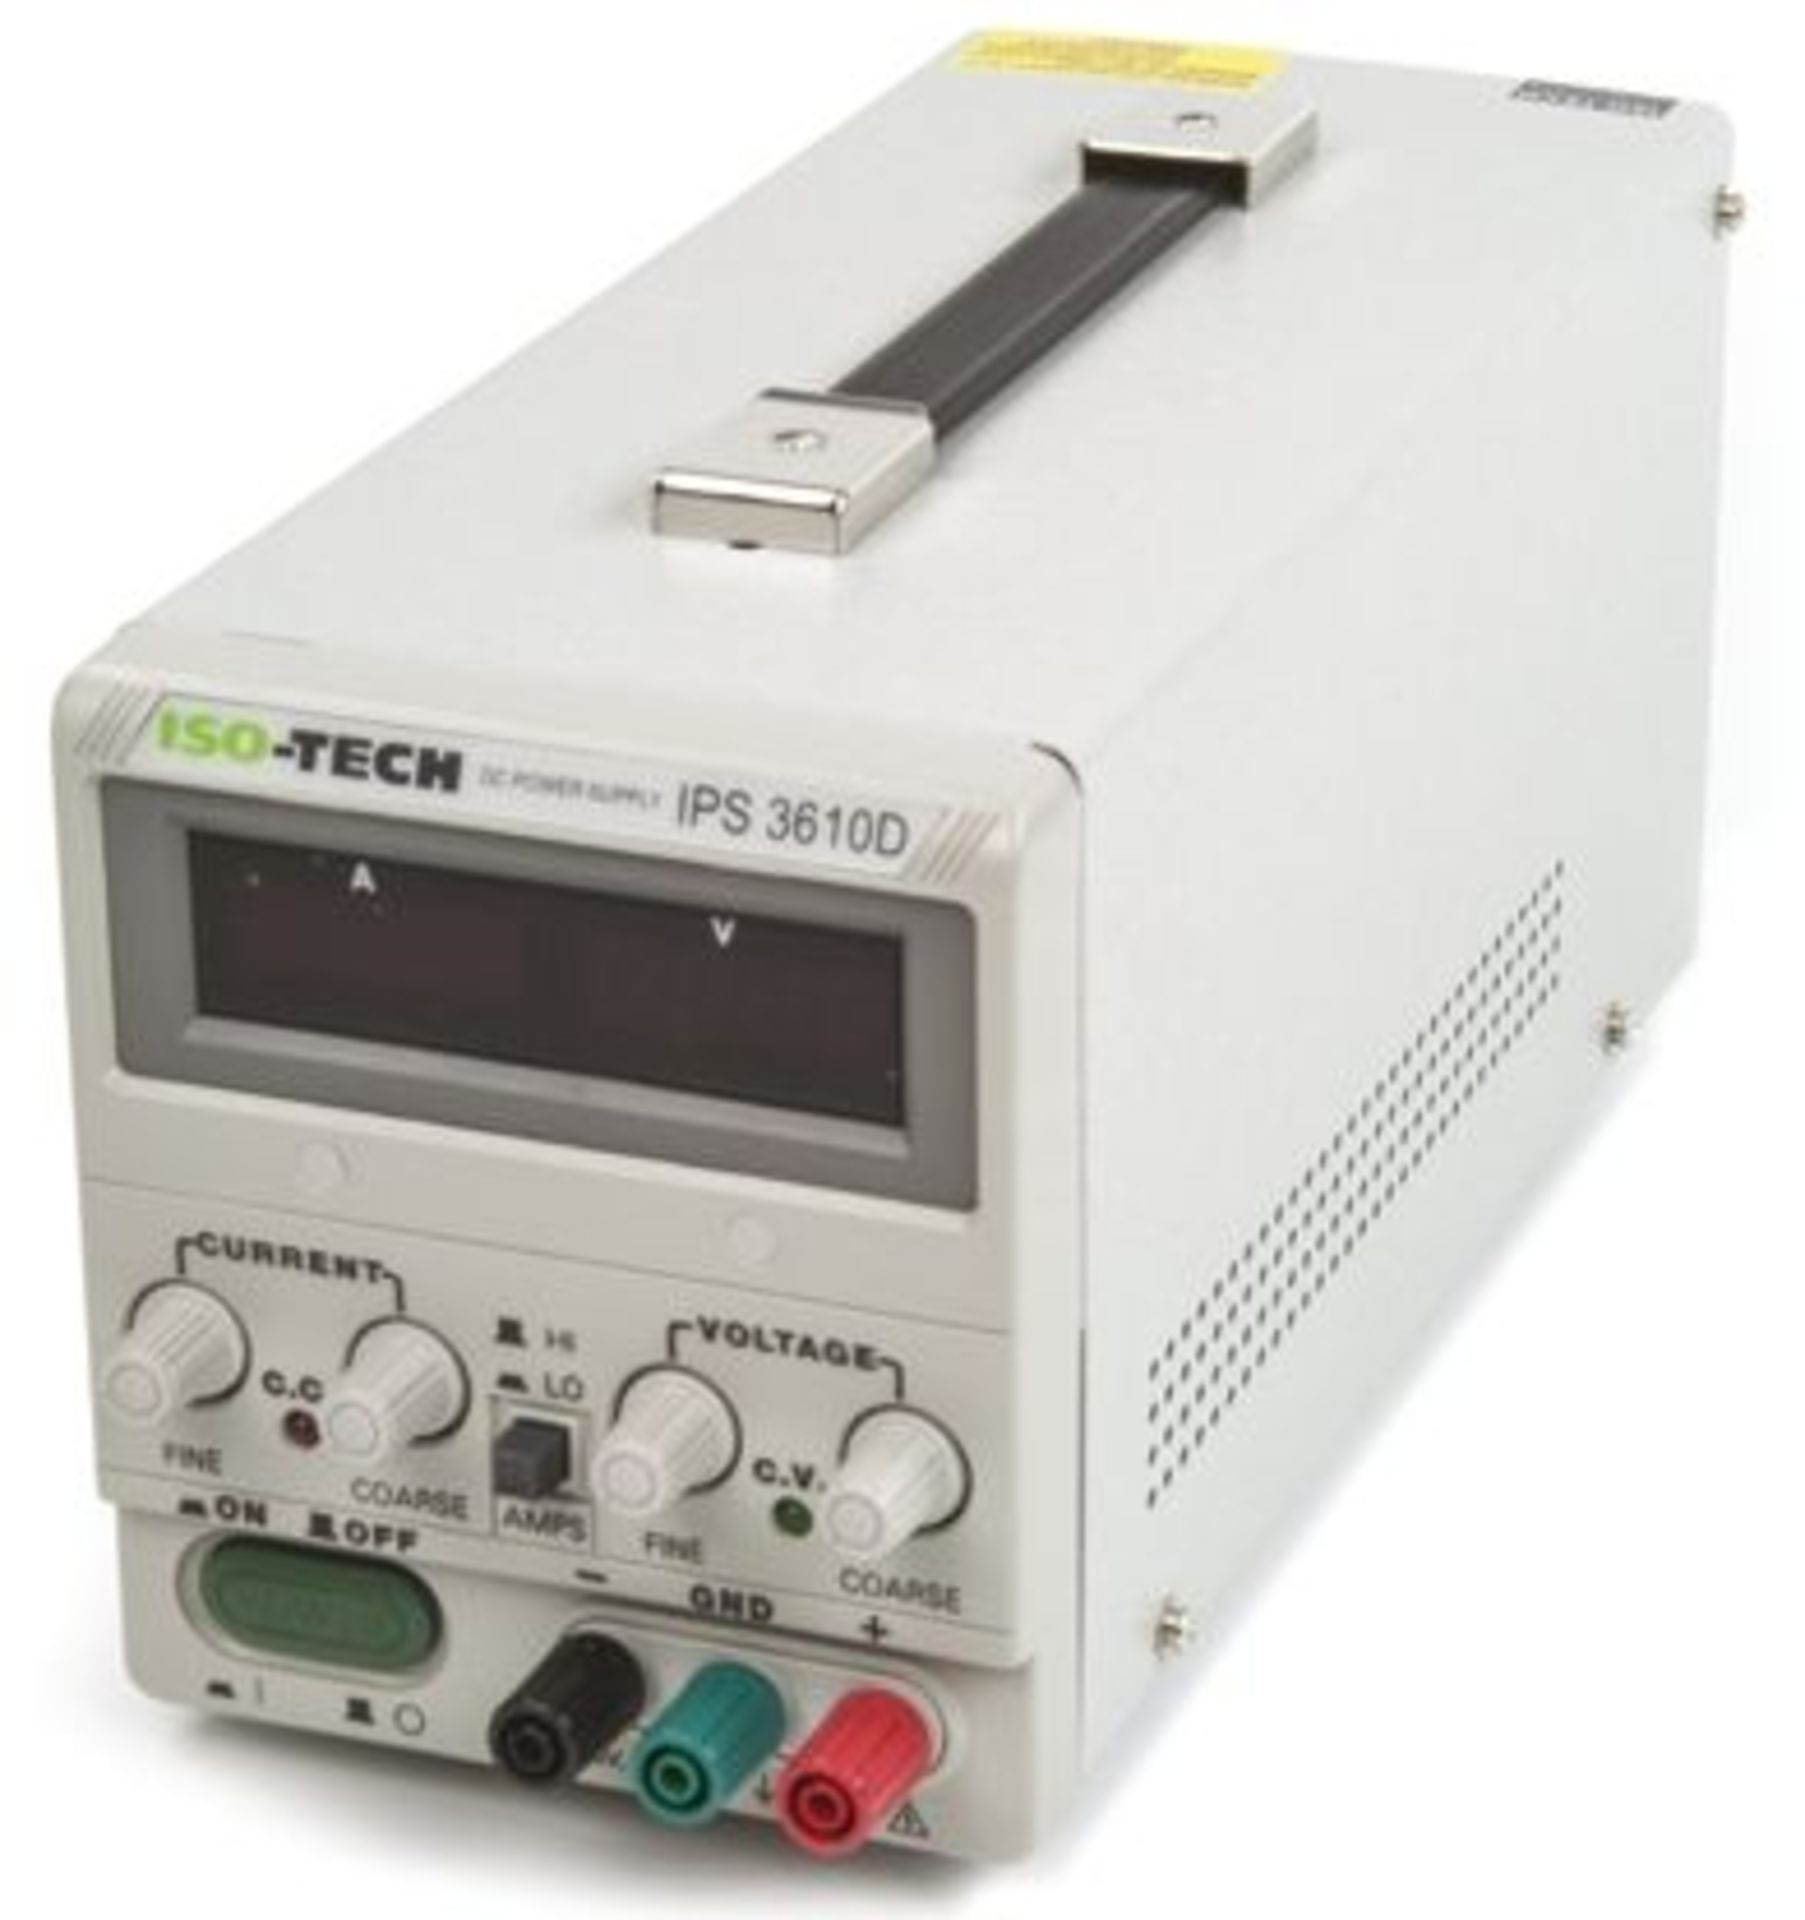 ISO-TECH IPS-3610D Digital Bench Power Supply, 1 Output 0-36V 0-10A 500W - Image 2 of 3